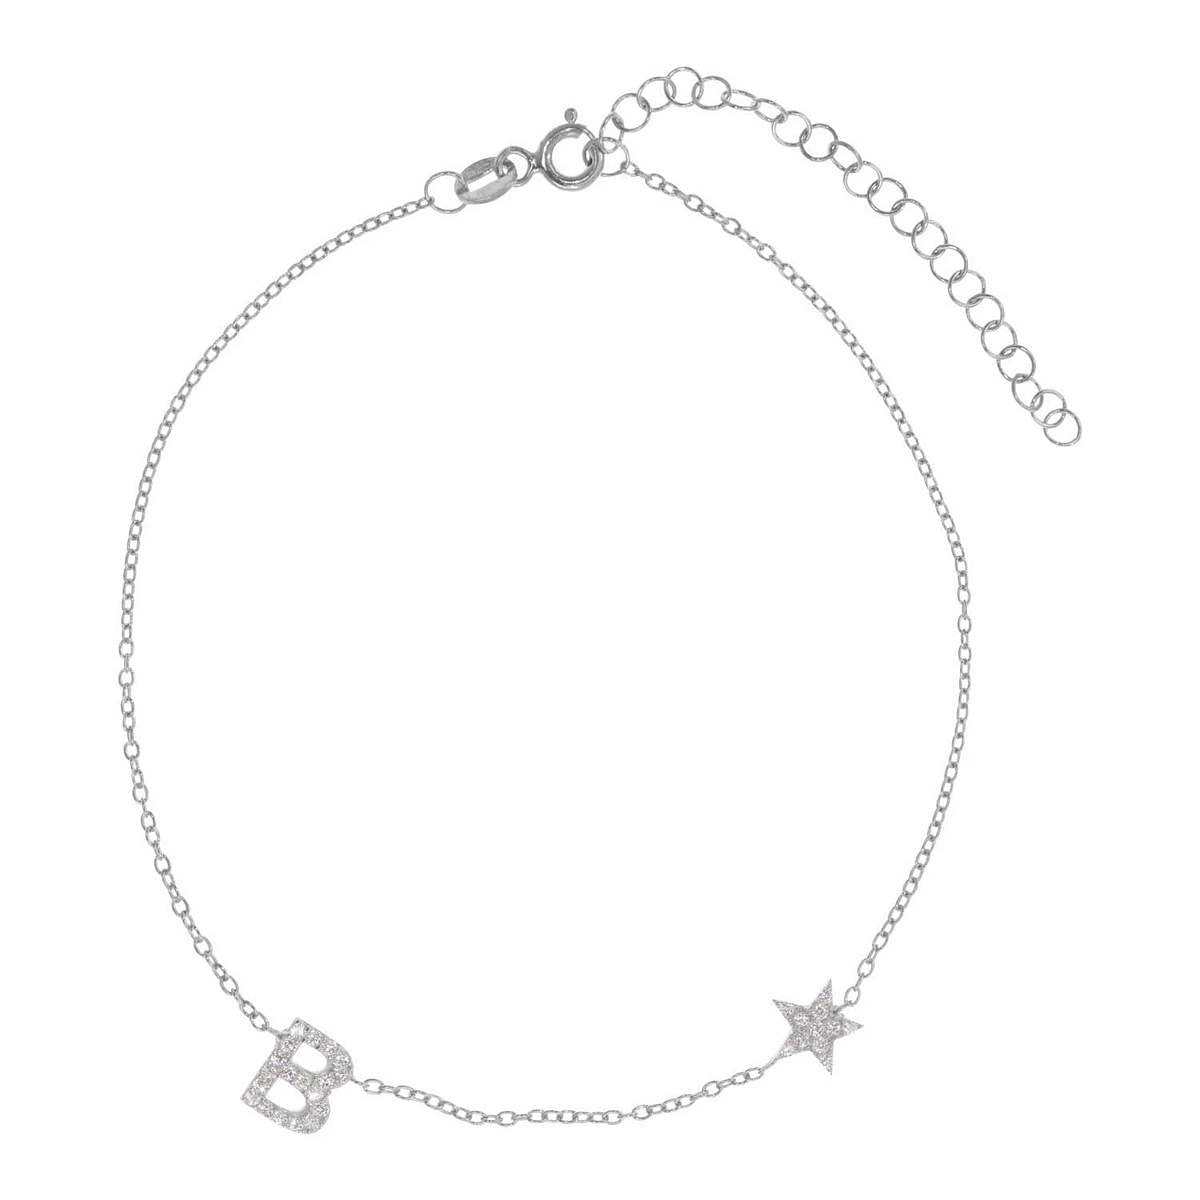 You're A Star Initial Bracelet in Crystal Clear